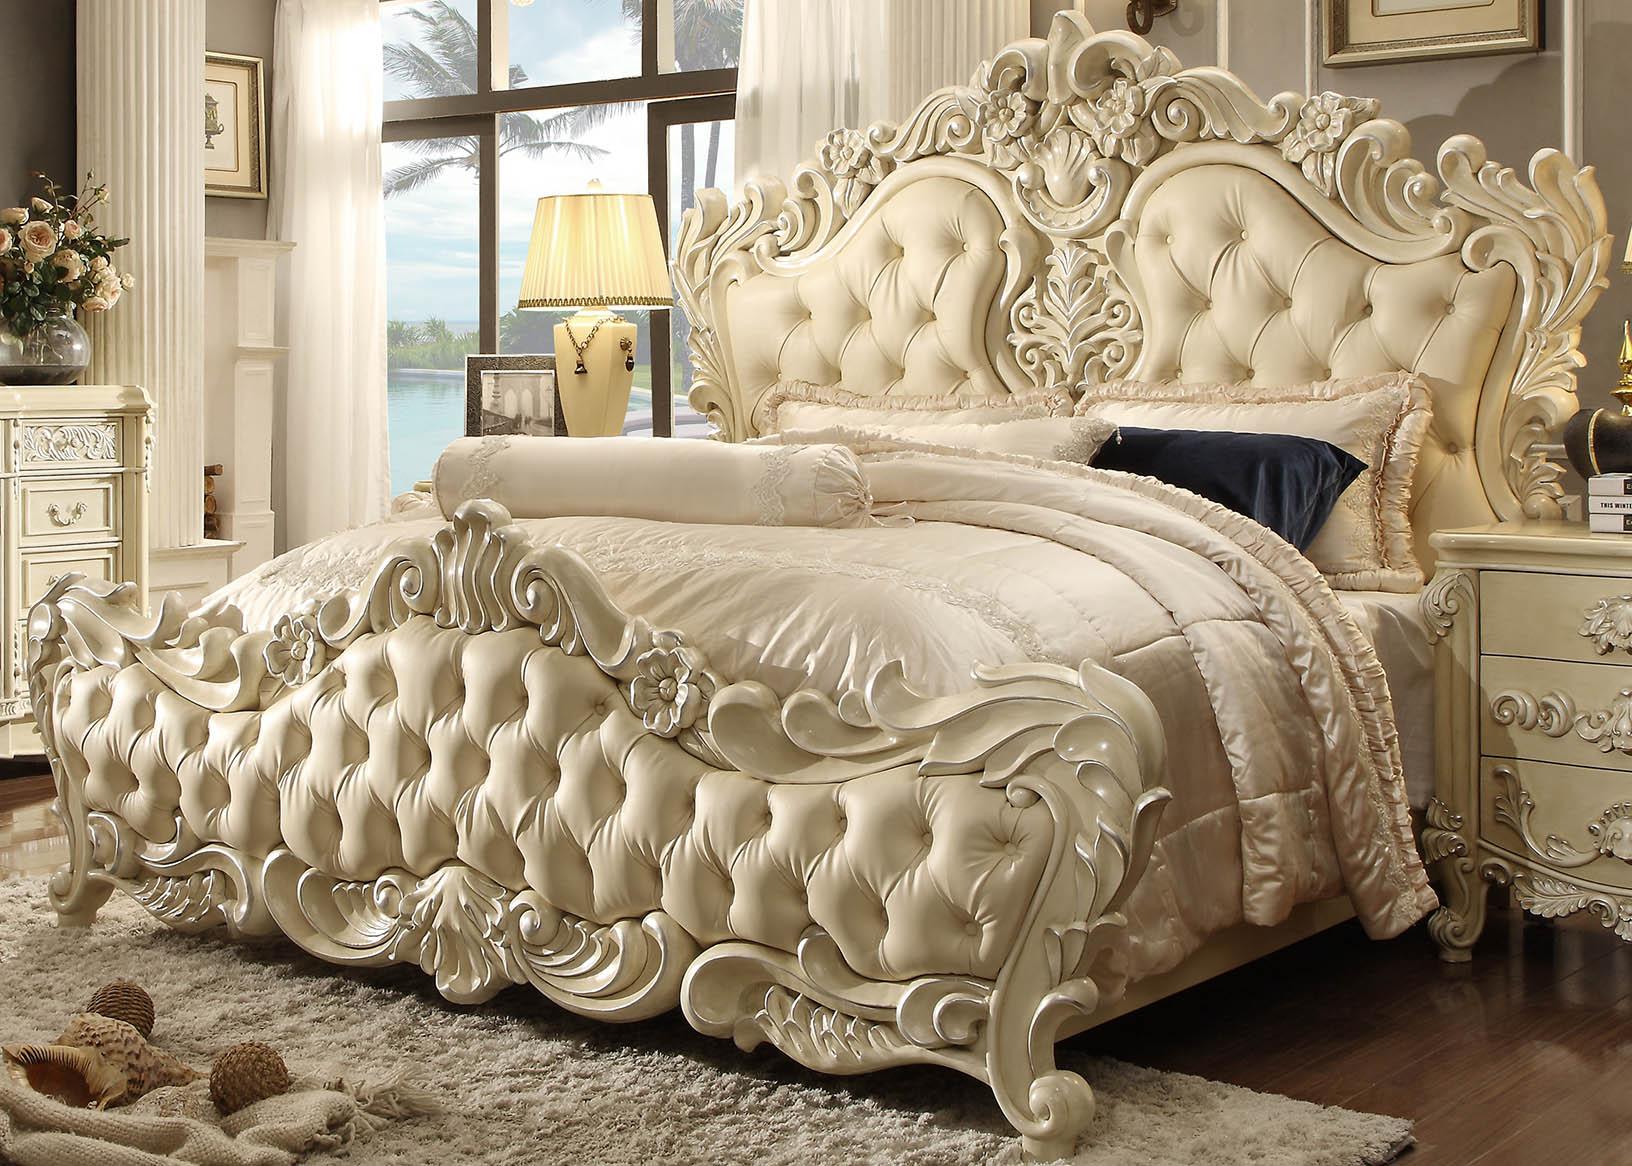 Traditional Panel Bed HD-5800 HD-CK5800 in Pearl, Cream Leather